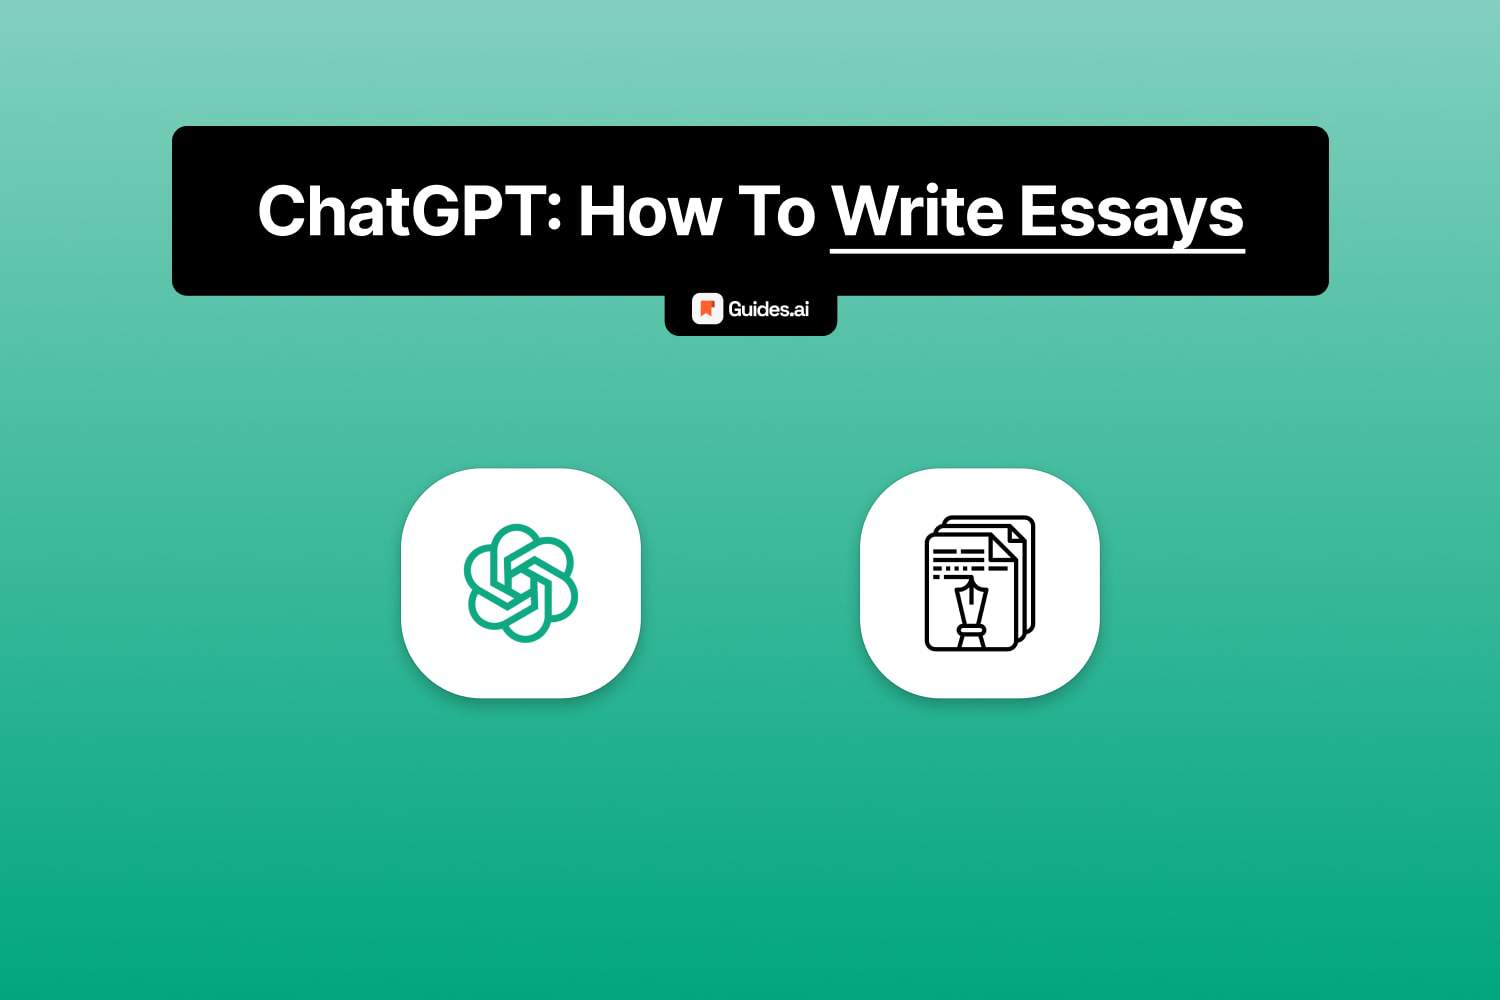 How to write an essay with ChatGPT